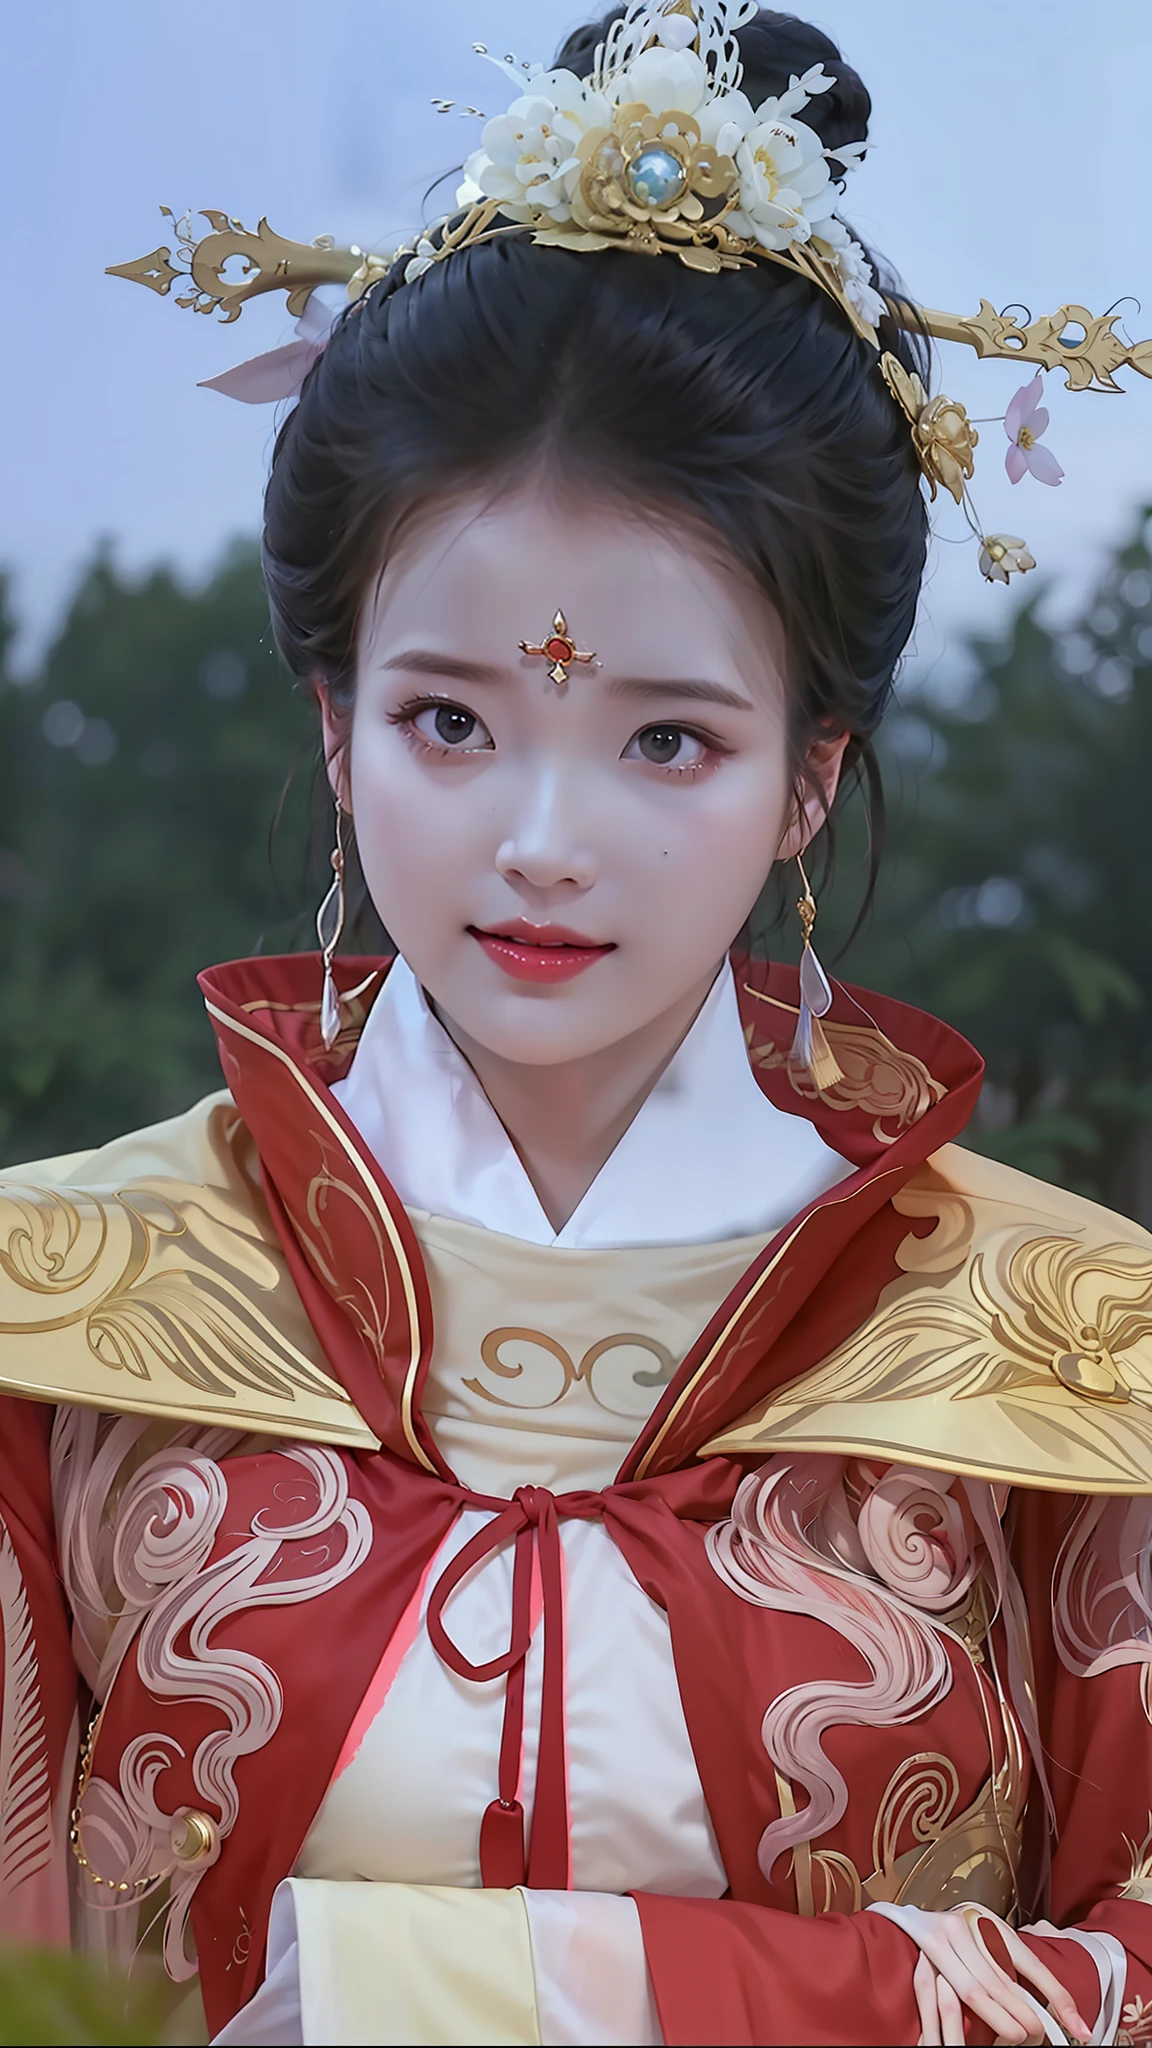 a close up of a woman wearing a red and gold dress, Princesa chinesa antiga, Palace ， A girl in Hanfu, China Princess, Beautiful rendering of the Tang Dynasty, inspired by Li Mei-shu, a beautiful fantasy empress, ancient chinese beauti, ancient asian dynasty princess, Inspired by Lan Ying, chinese empress, Inspired by Zhao Yuan, Inspired by Qiu Ying